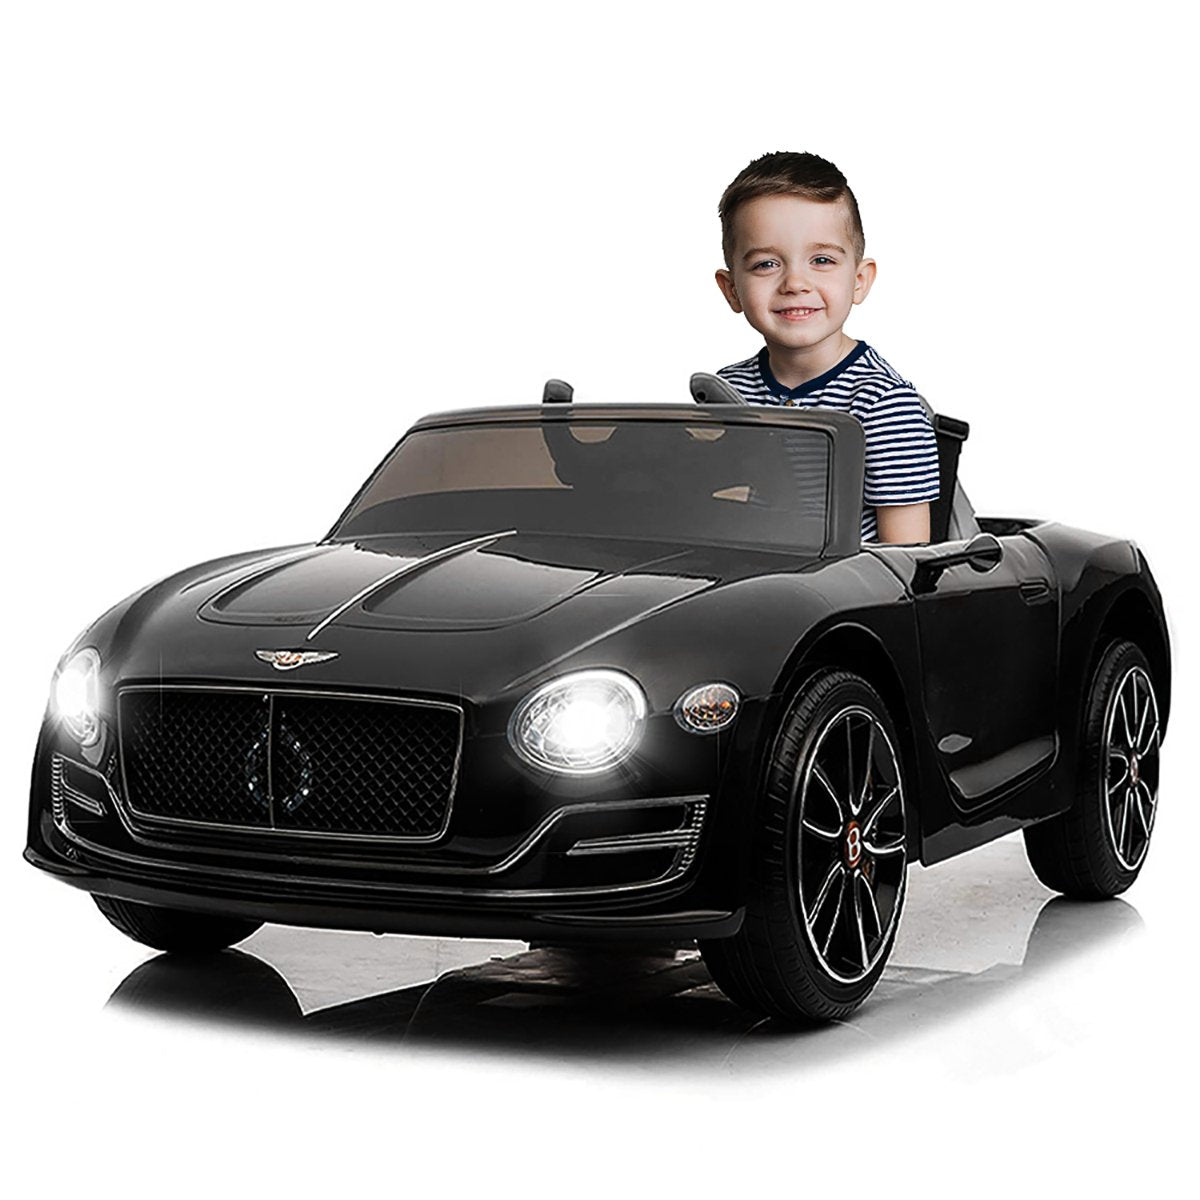 Kimbosmart® Kids Ride Bentley Exp12 Child Toy Electric Remote Control LED MP3